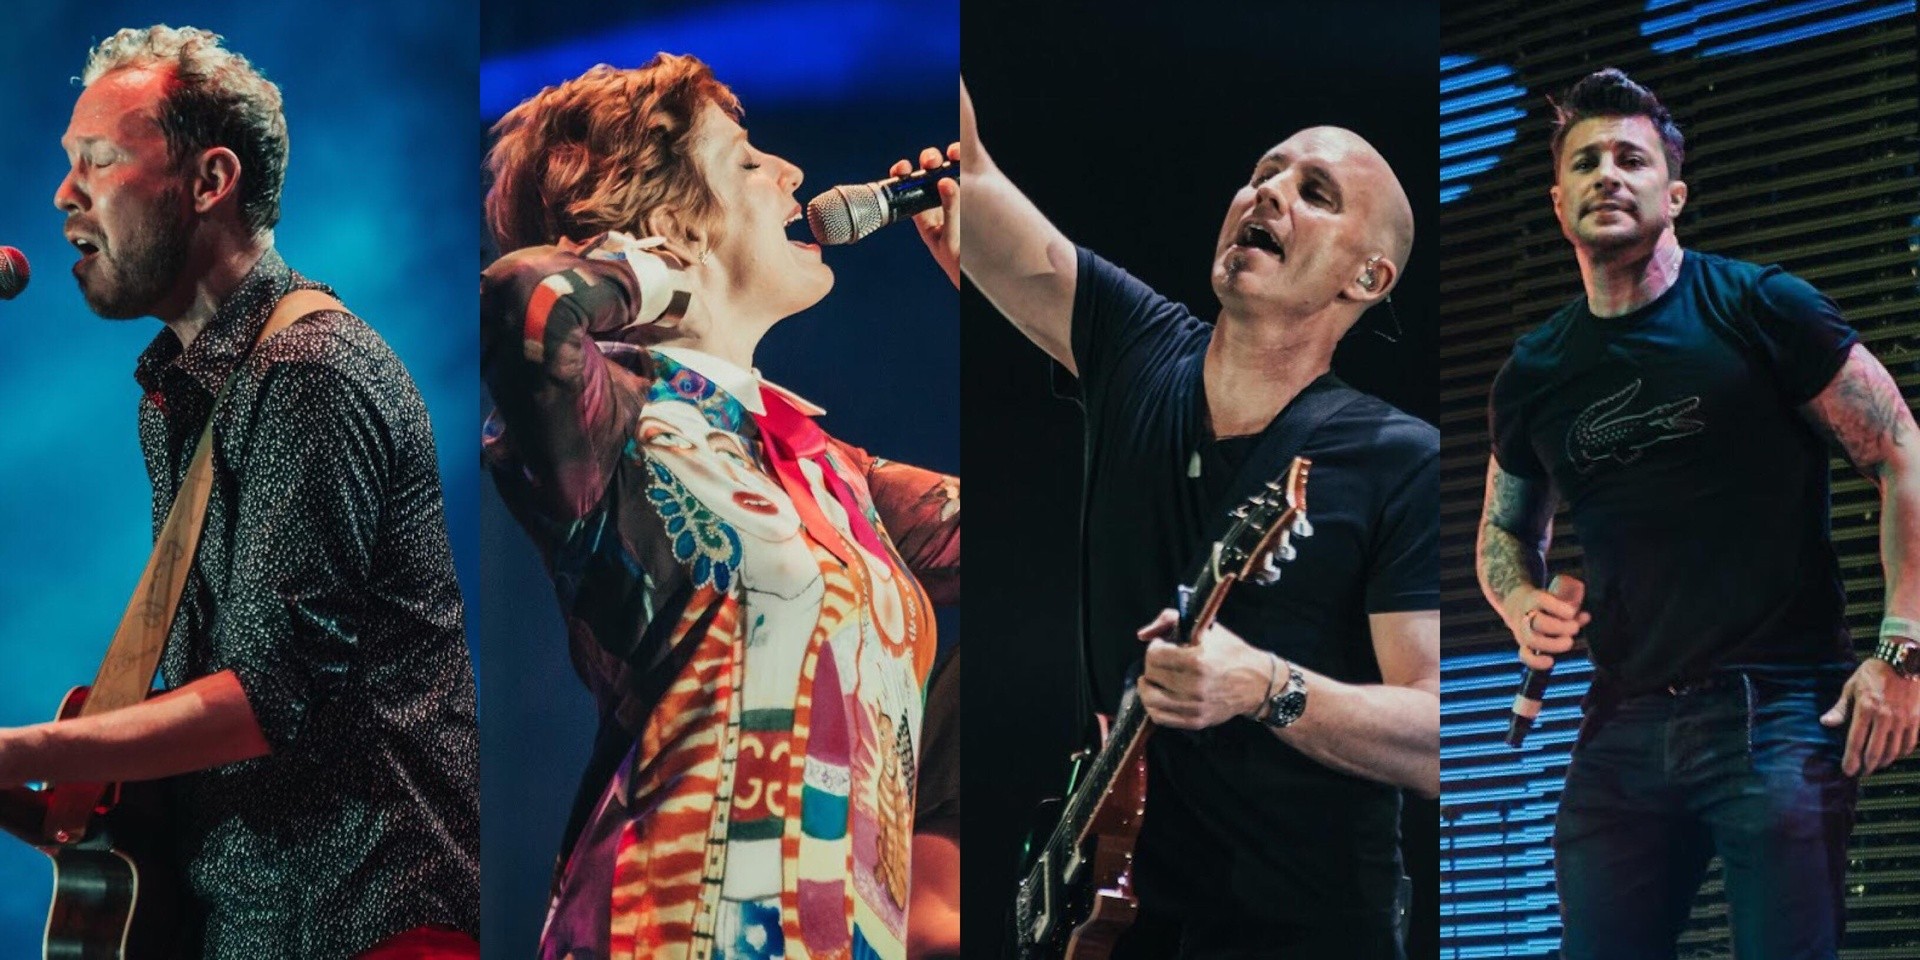 Playback Music Festival takes fans back to the 2000's with Leigh Nash, Vertical Horizon, BLUE, and more